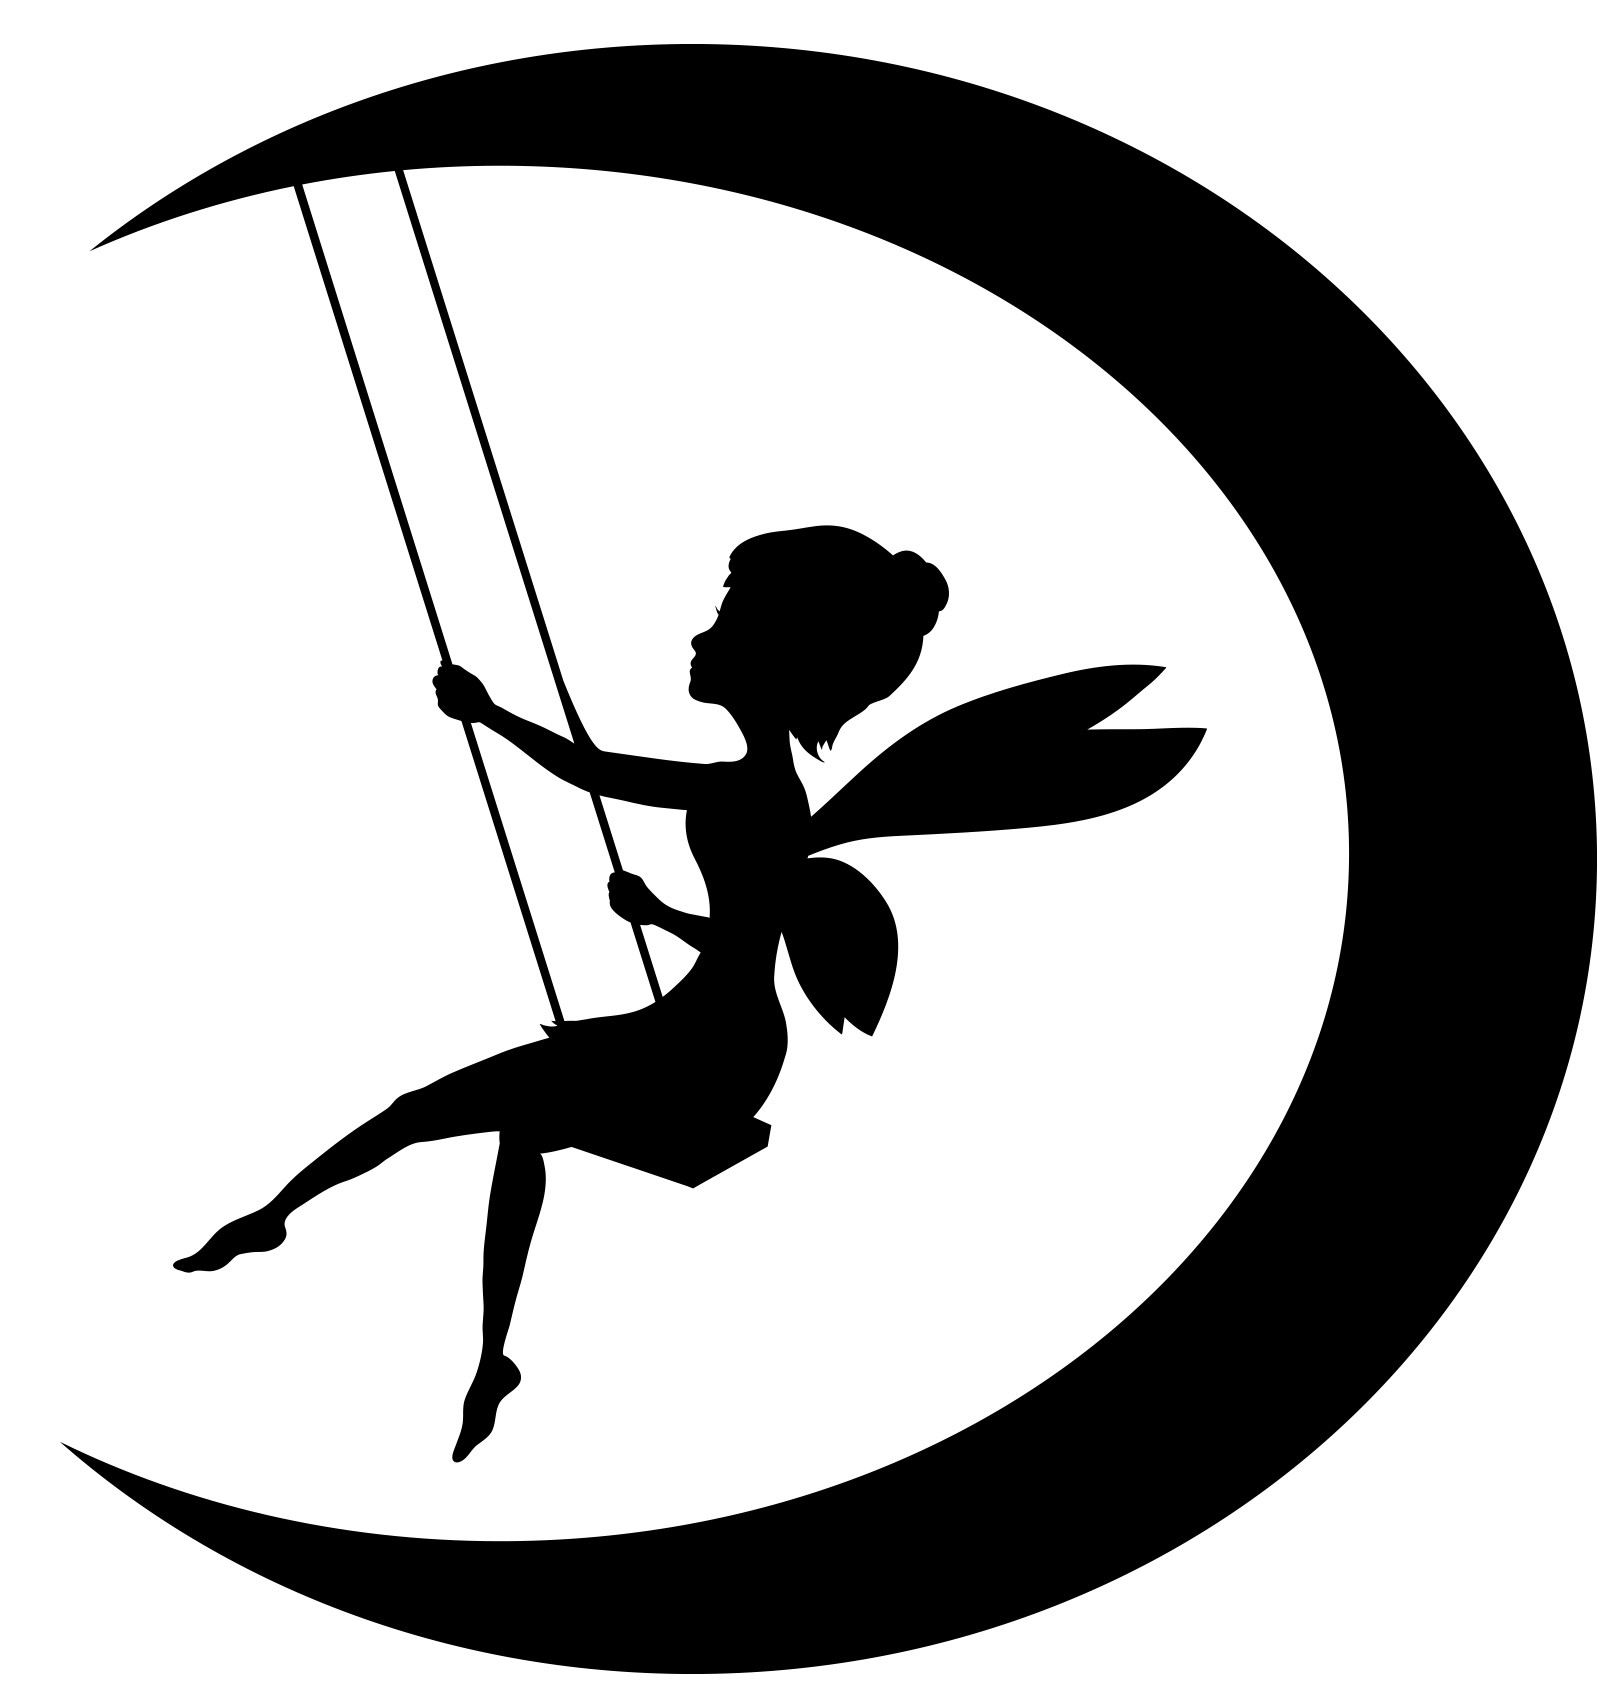 tinkerbell clipart tinkerbell outline